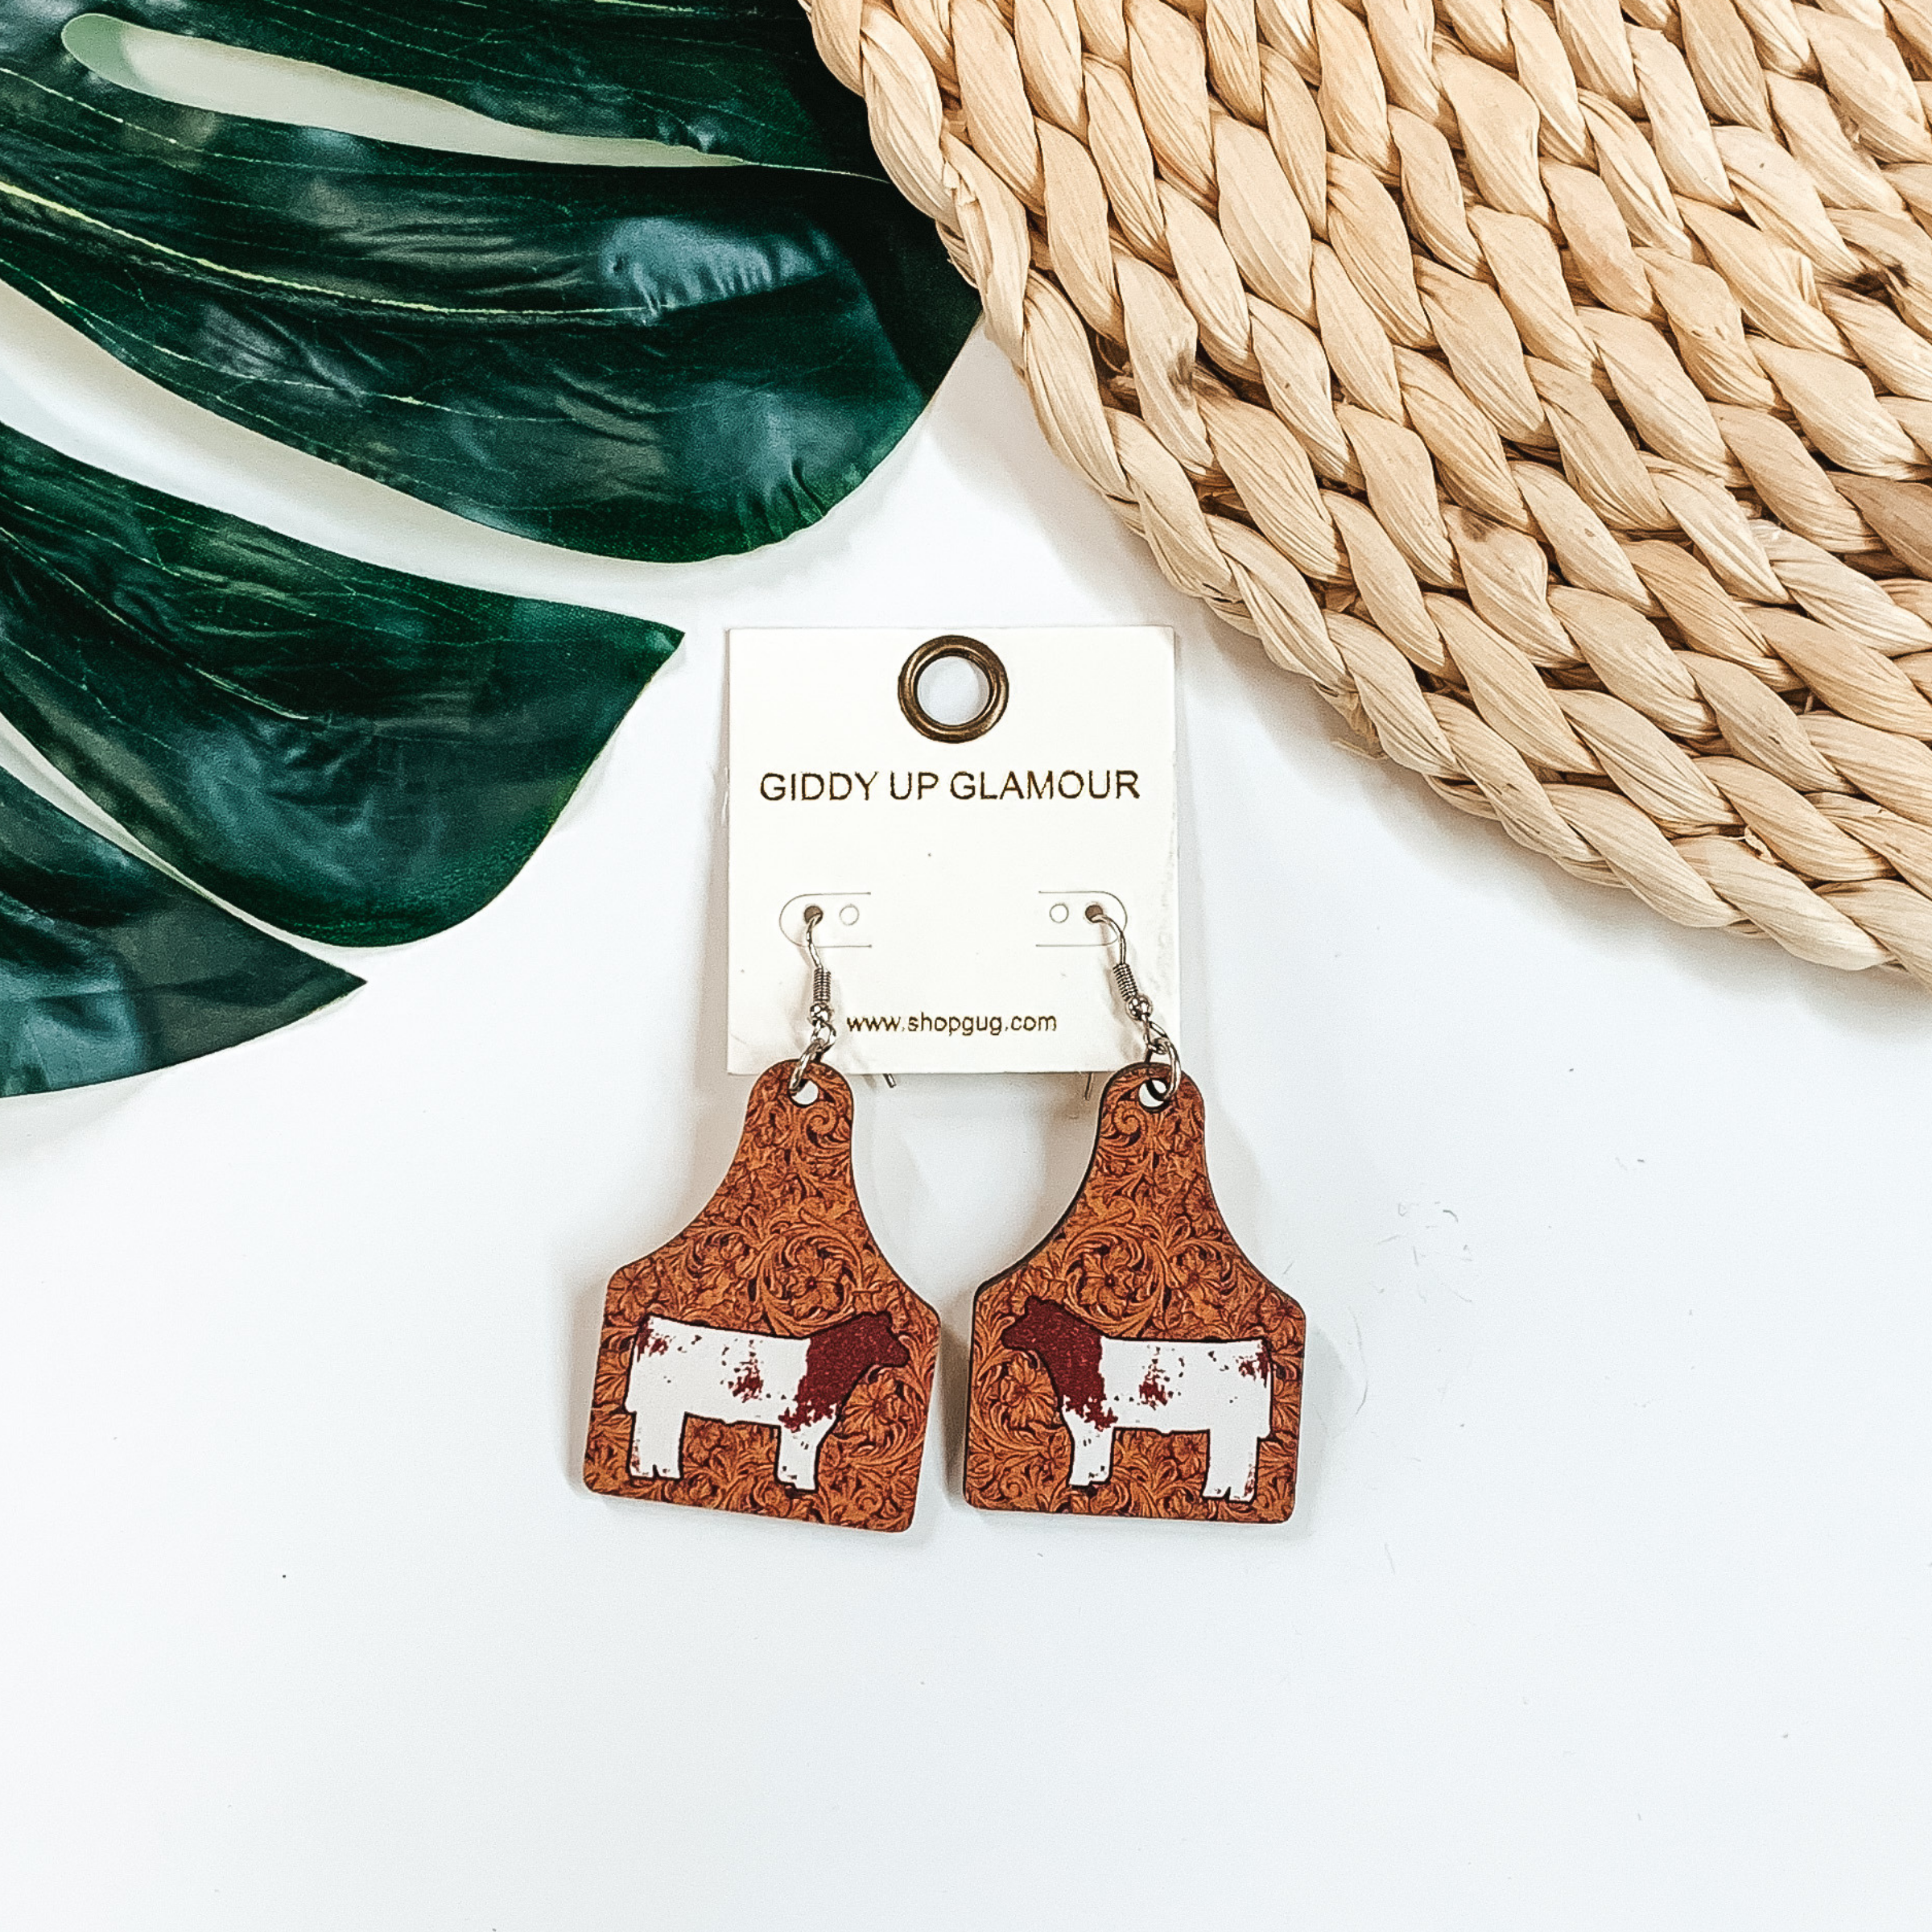 Cattle tag drop earrings with a tooled leather print. In the center of the earrings is a brown and white cow. These earrings are pictured on a white background with a green leaf and tan basket weave material at the top of the picture. 